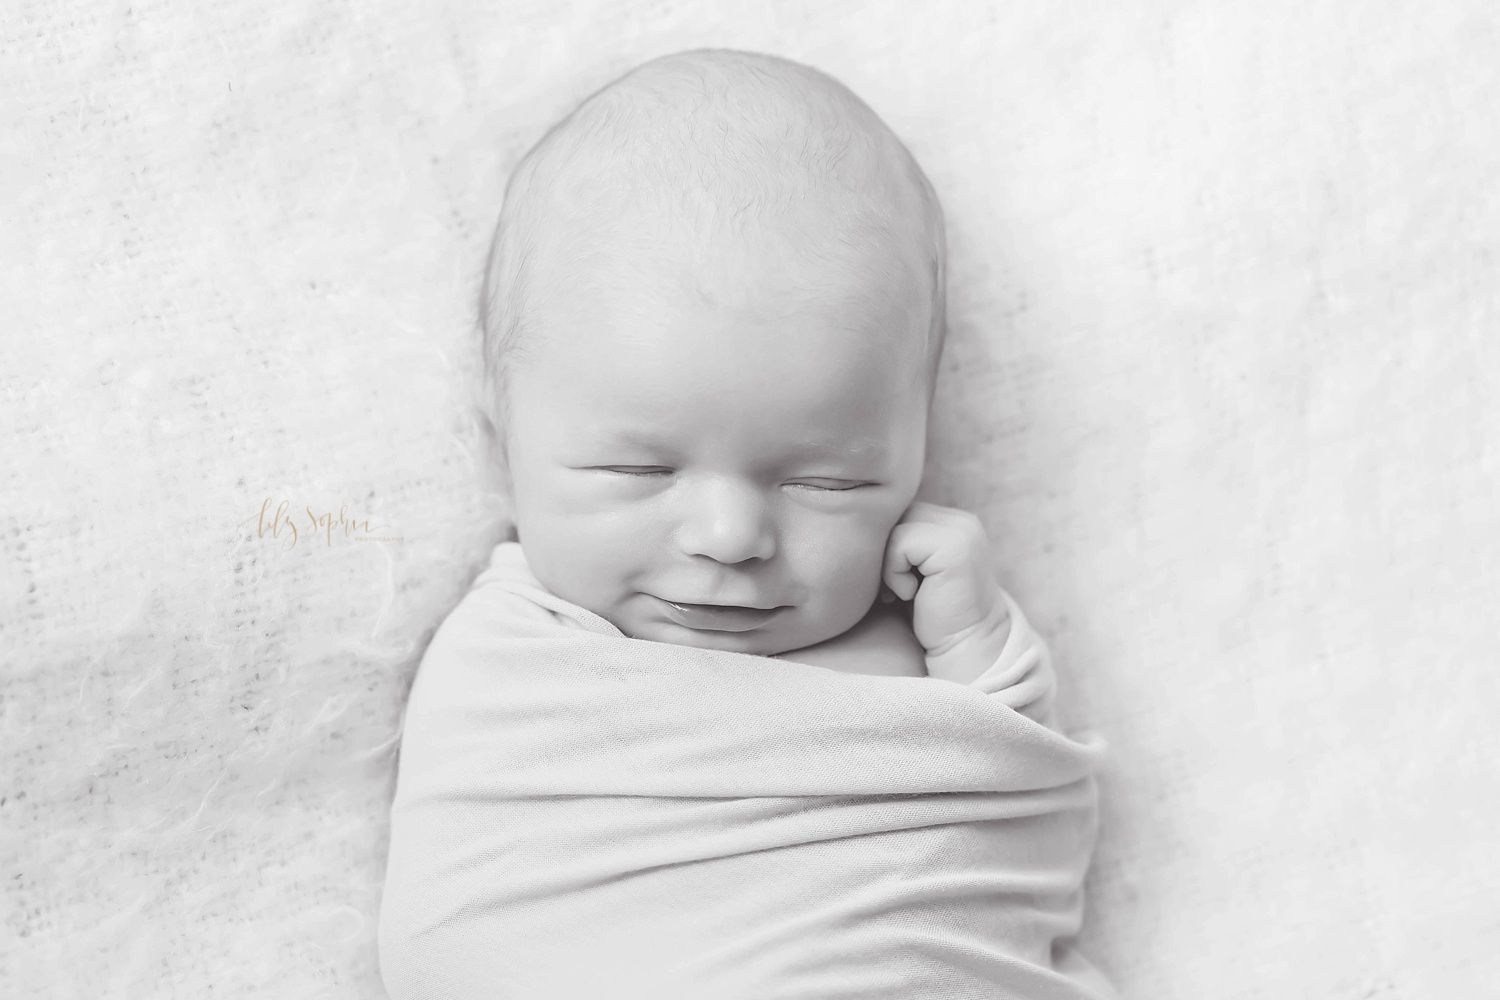  Black and white image of a sleeping, newborn boy, wrapped up, with one of his hands sticking out, curled next to his chin, taken in the natural light studio of Lily Sophia Photography.&nbsp; 